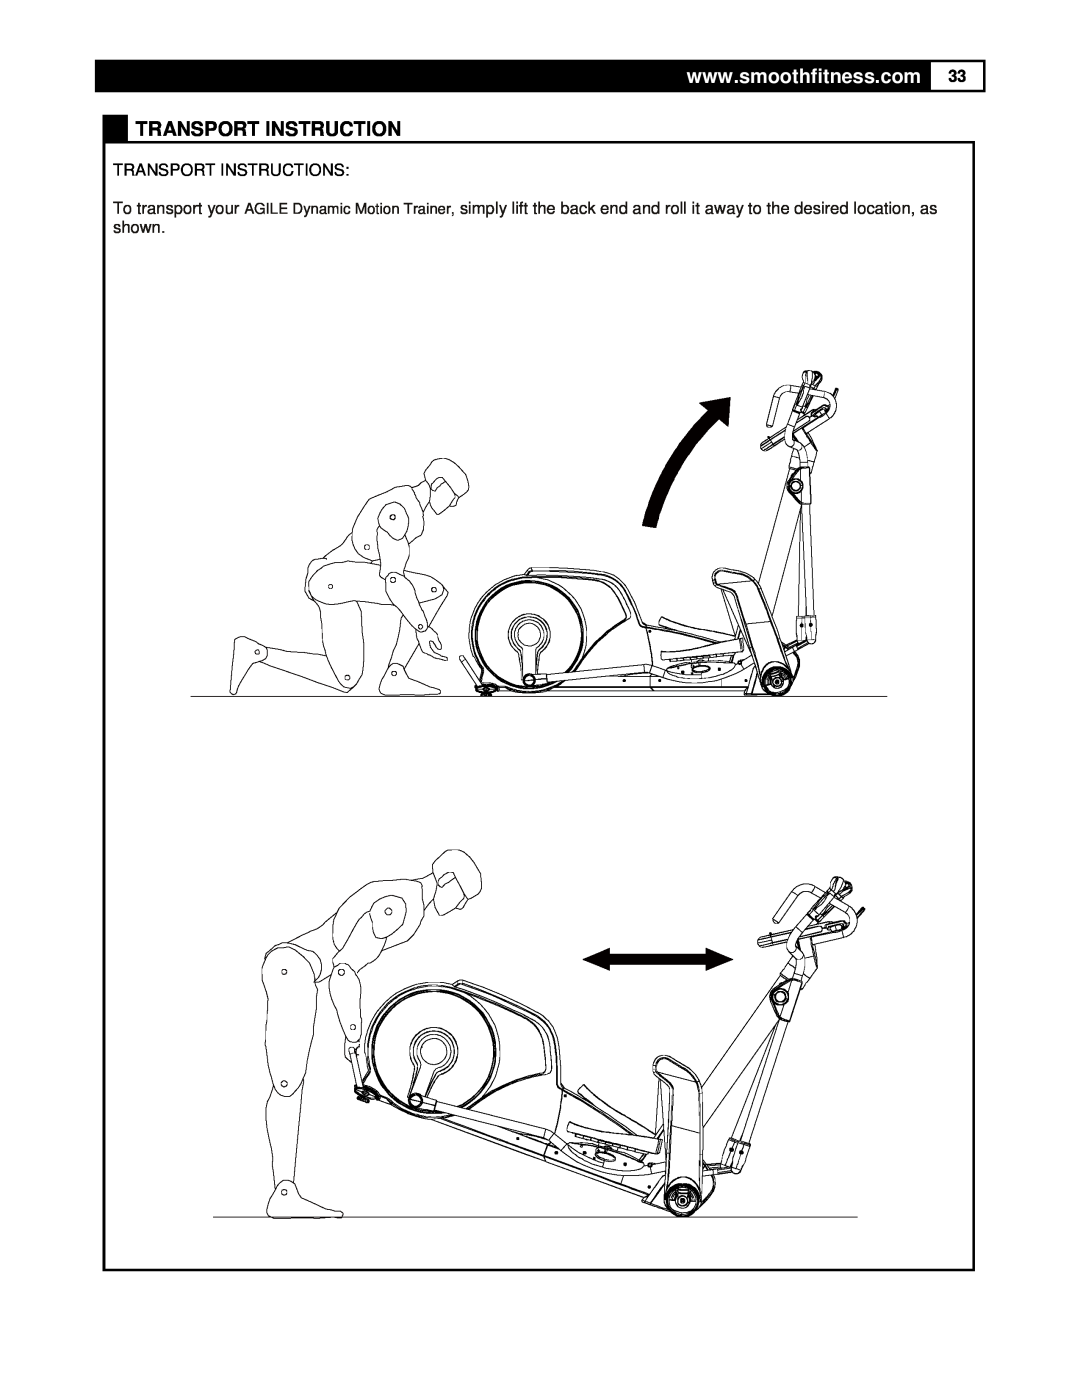 Smooth Fitness DMT X2 user manual Transport Instructions 